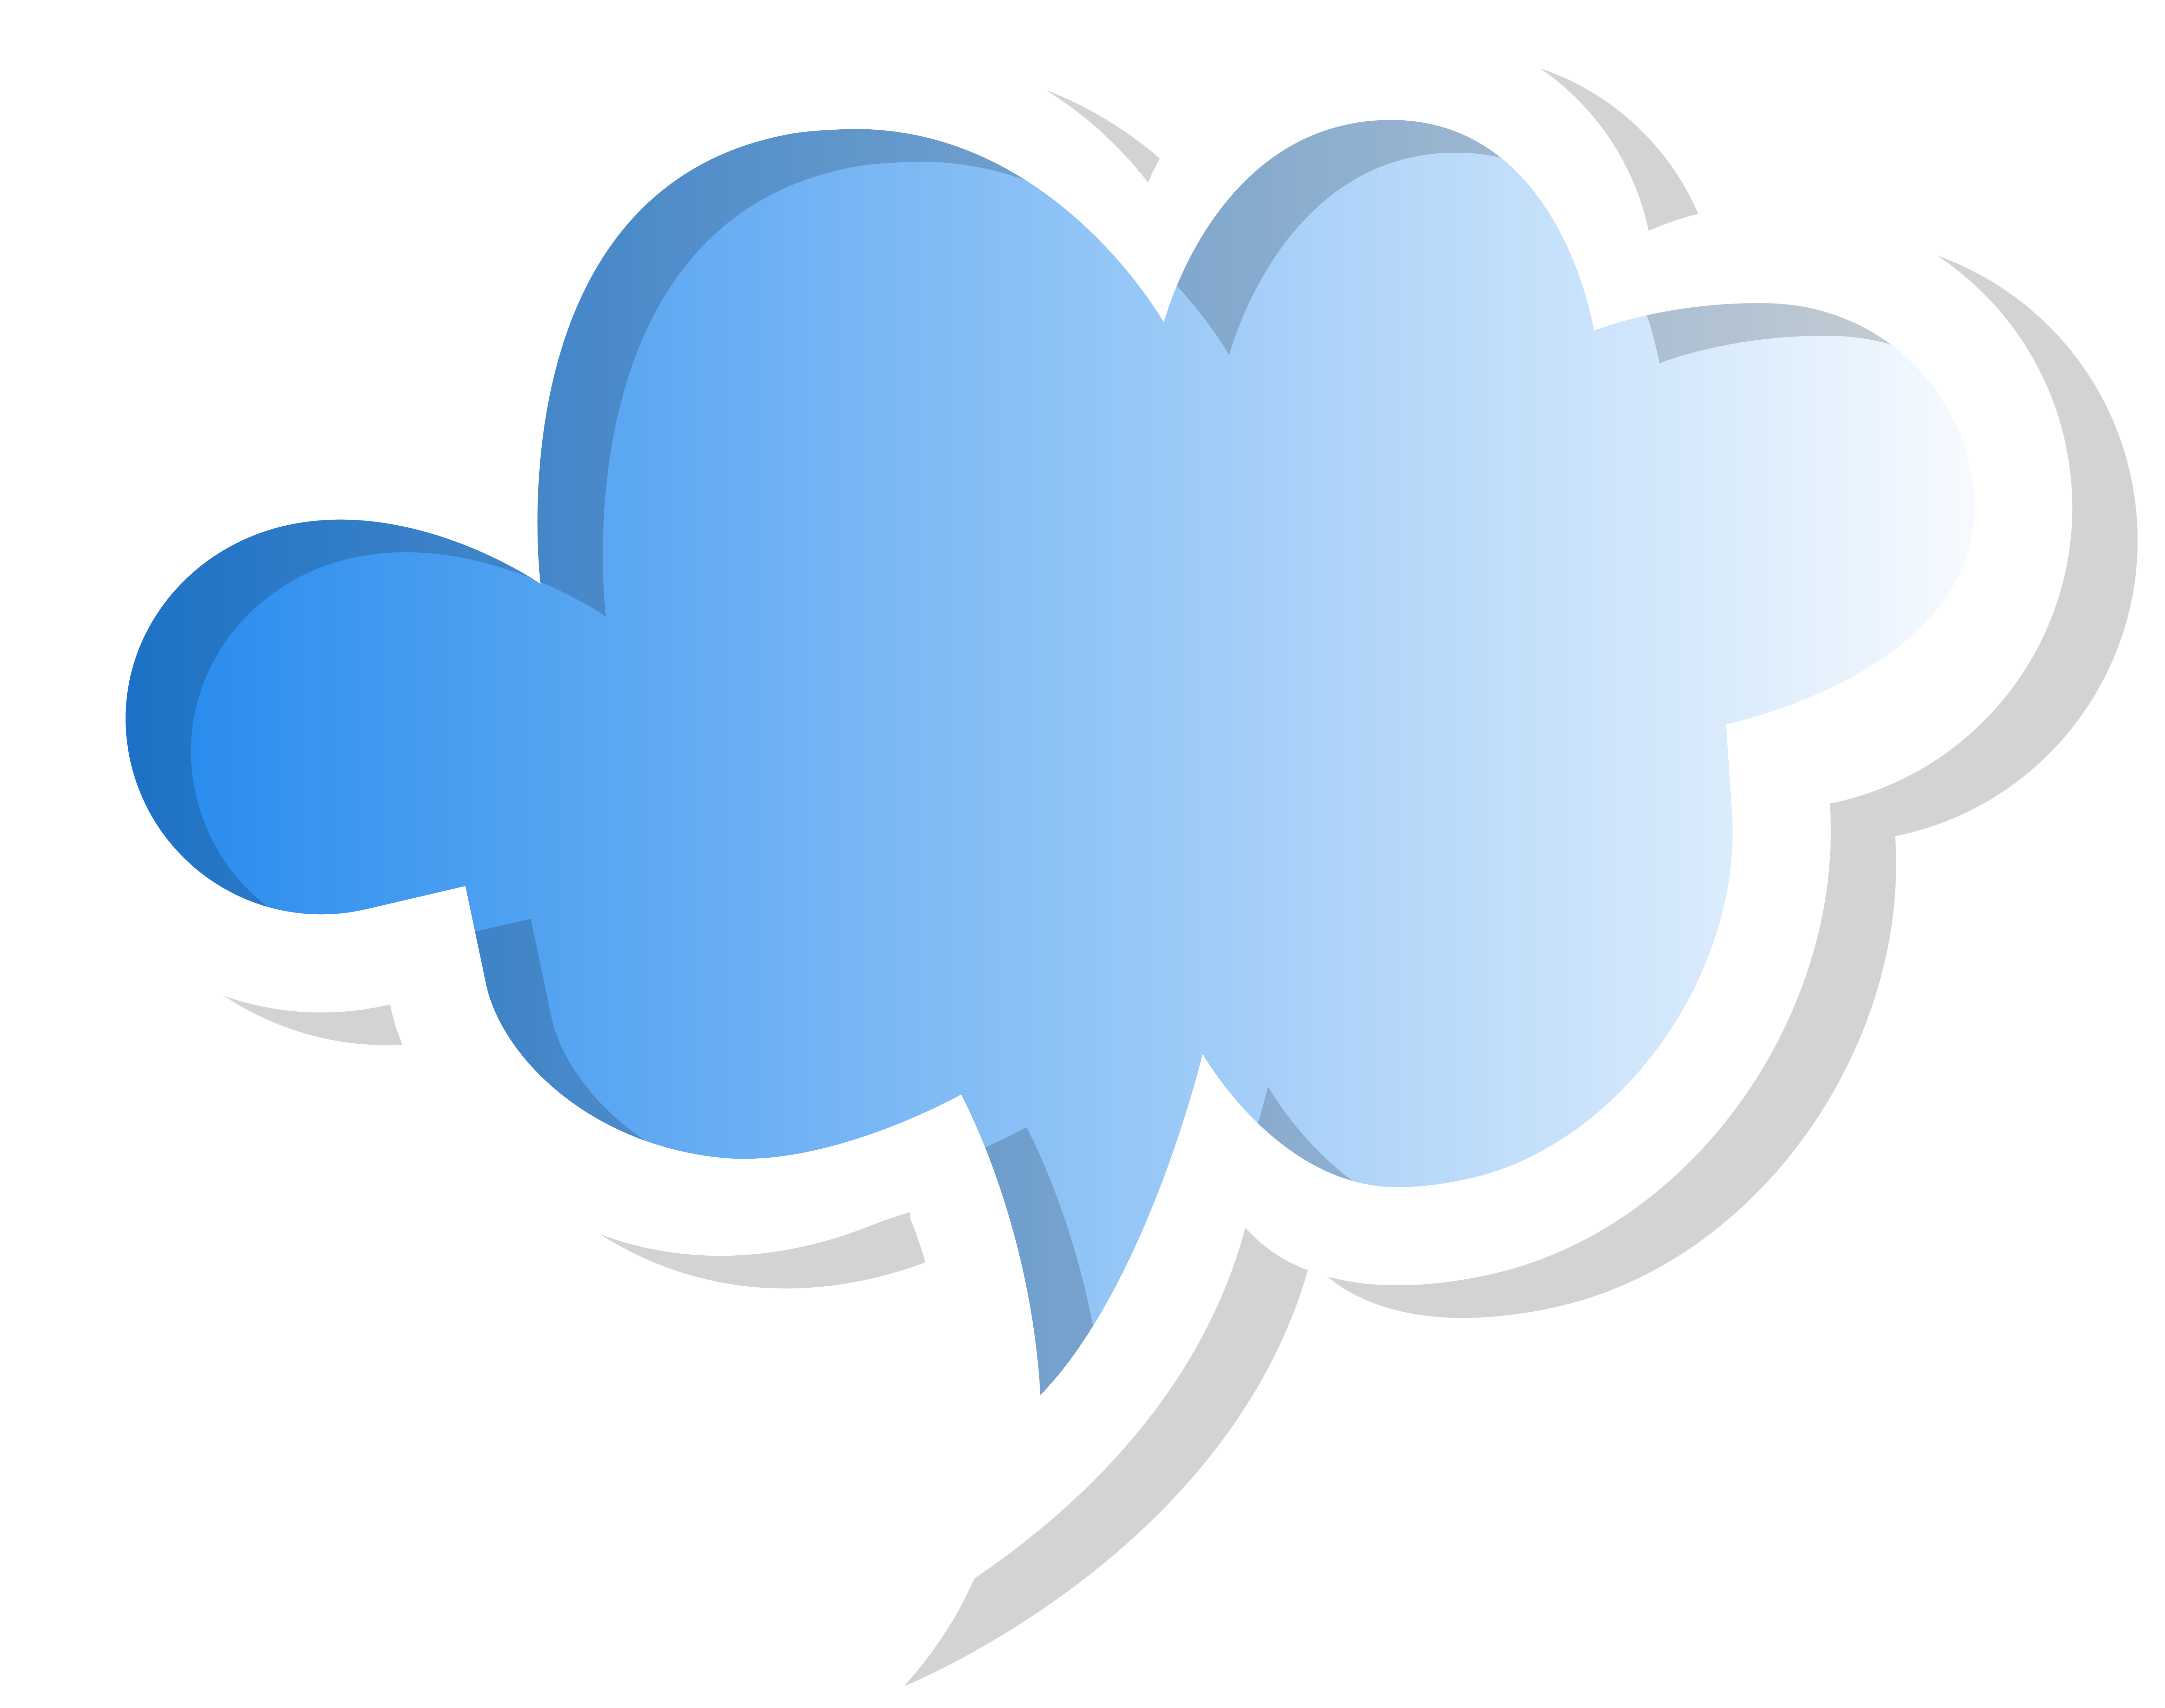 Cloud clipart chat, Cloud chat Transparent FREE for download